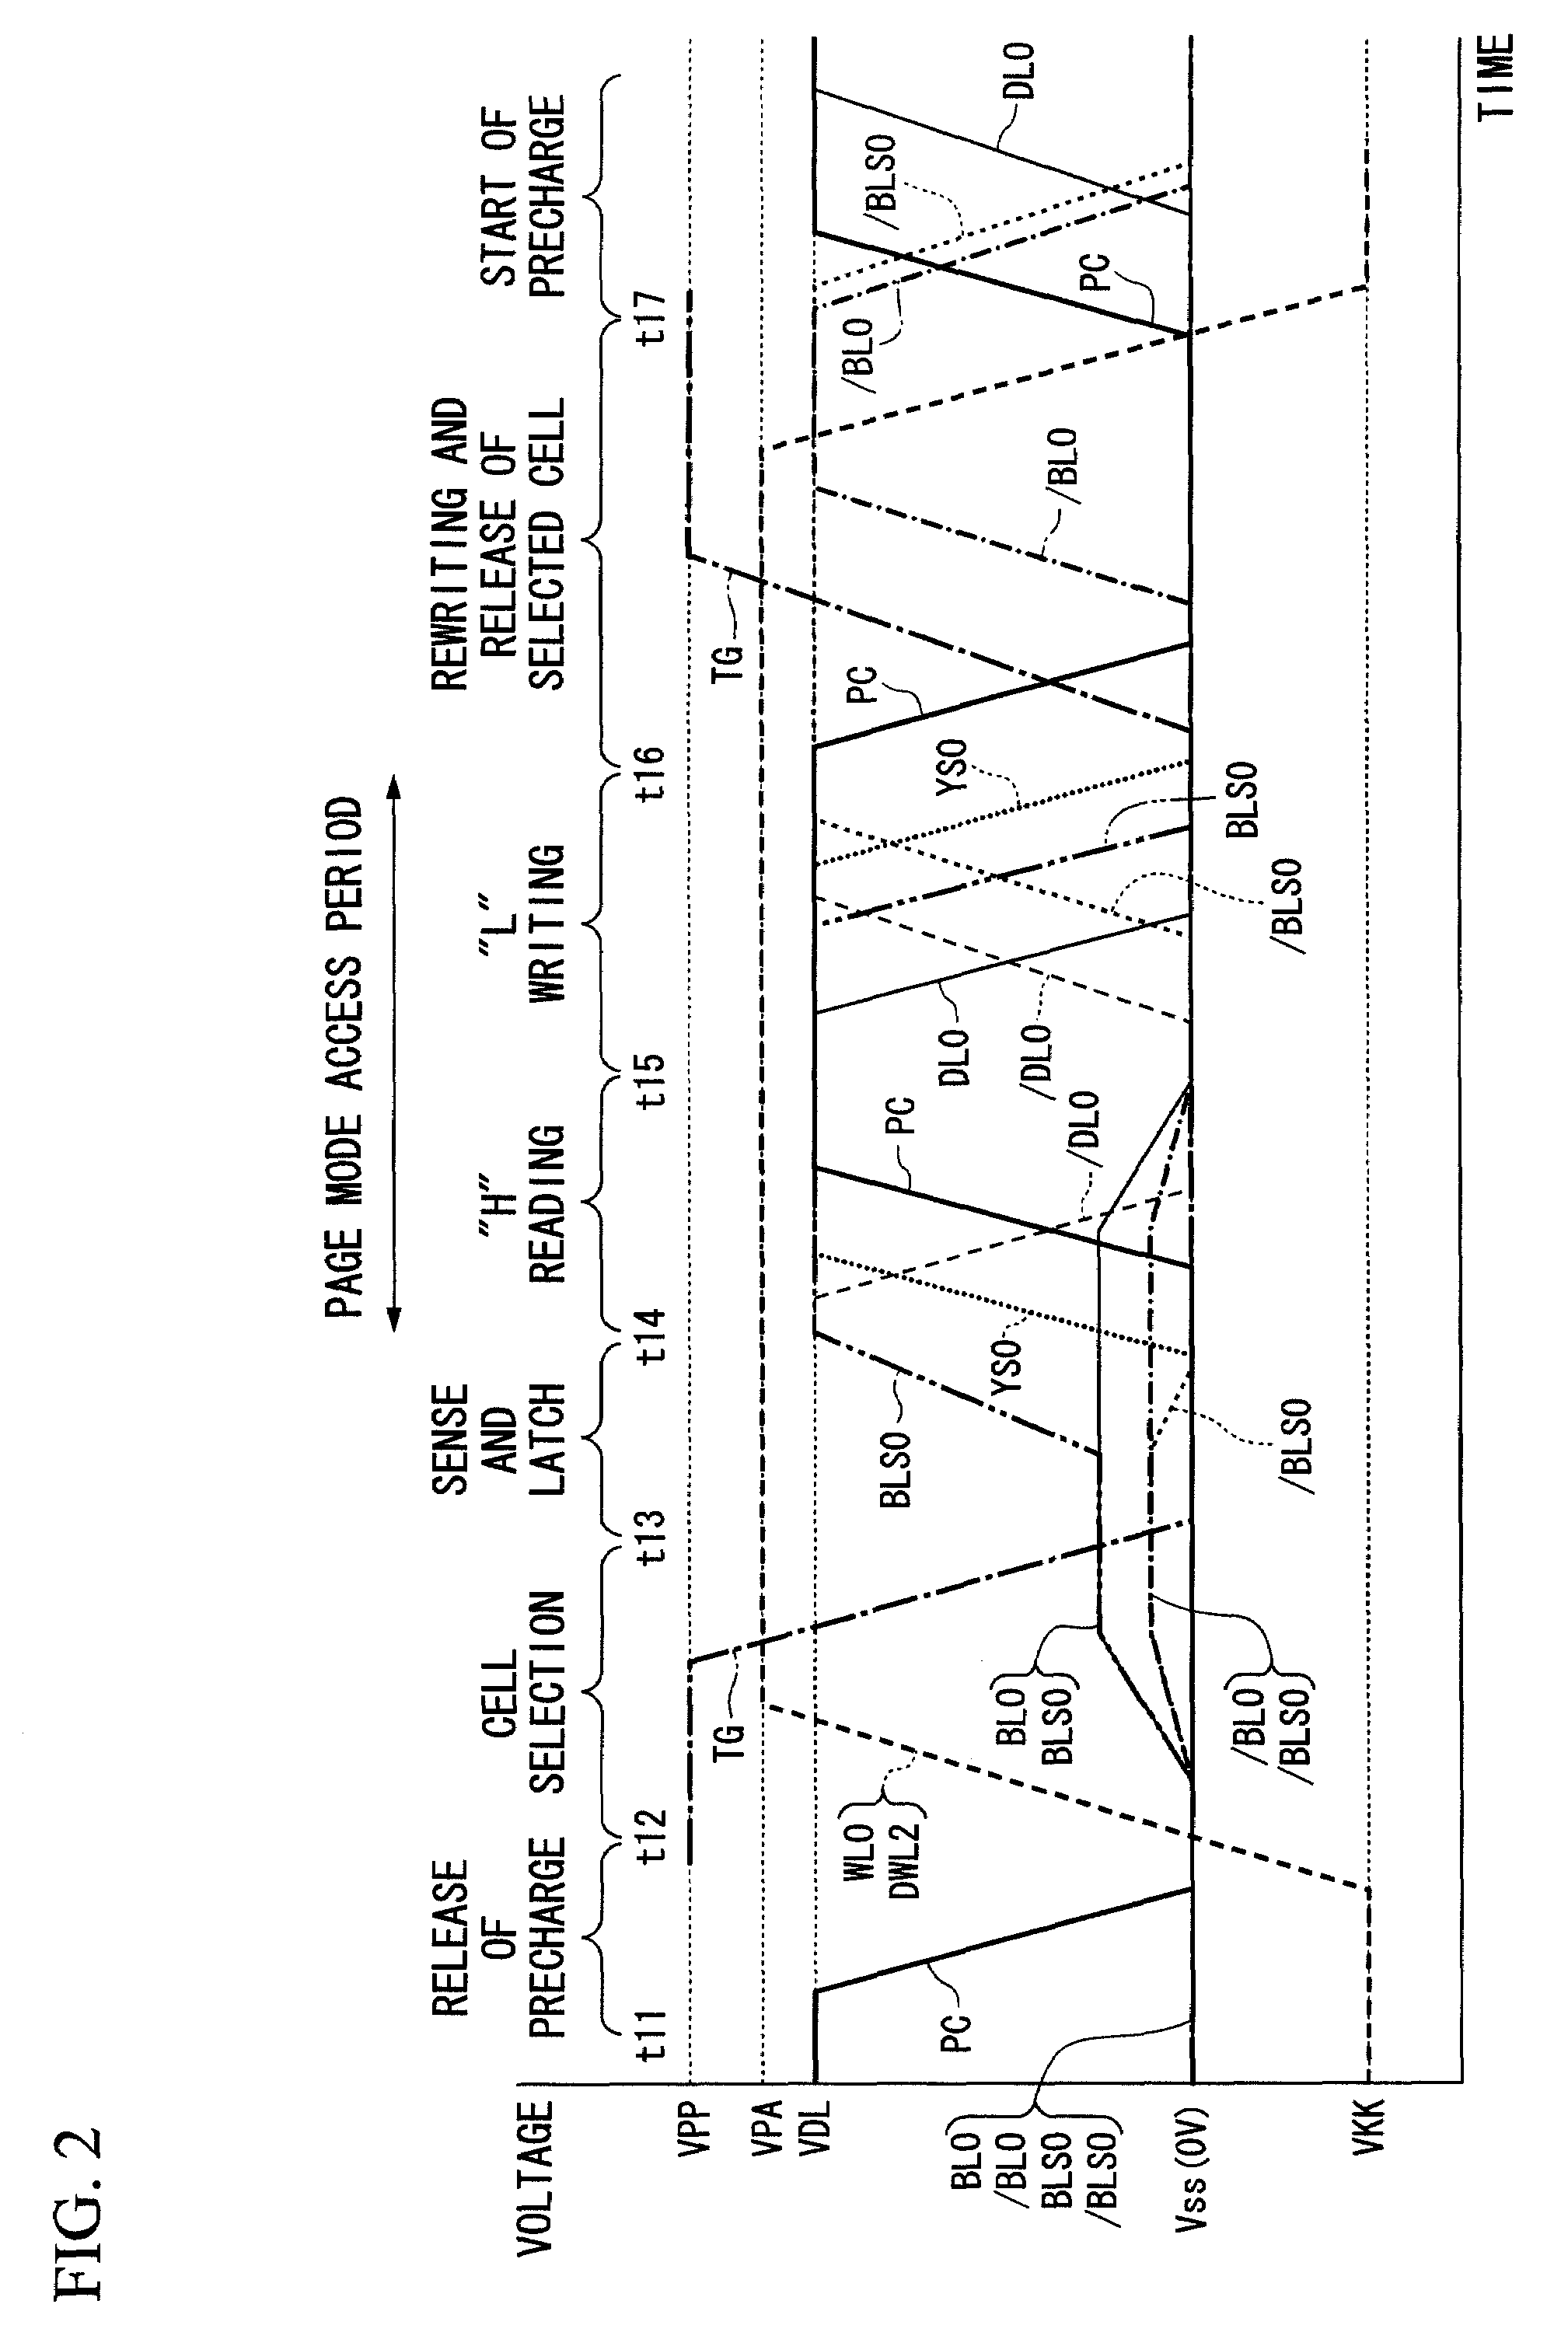 Semiconductor memory device for precharging bit lines except for specific reading and writing periods